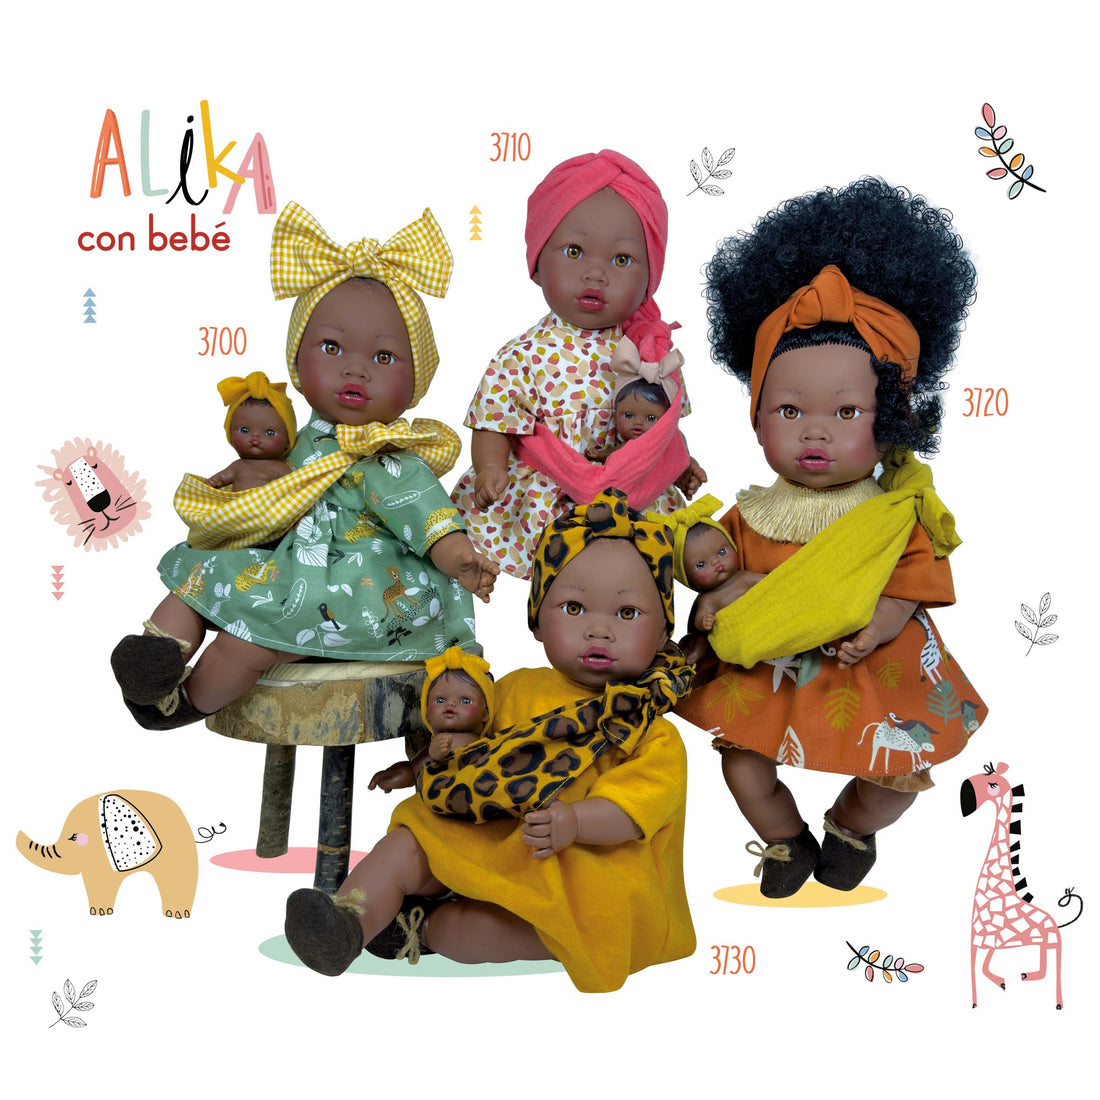 Handcrafted Alika Doll with Baby (3720) by Nines d&